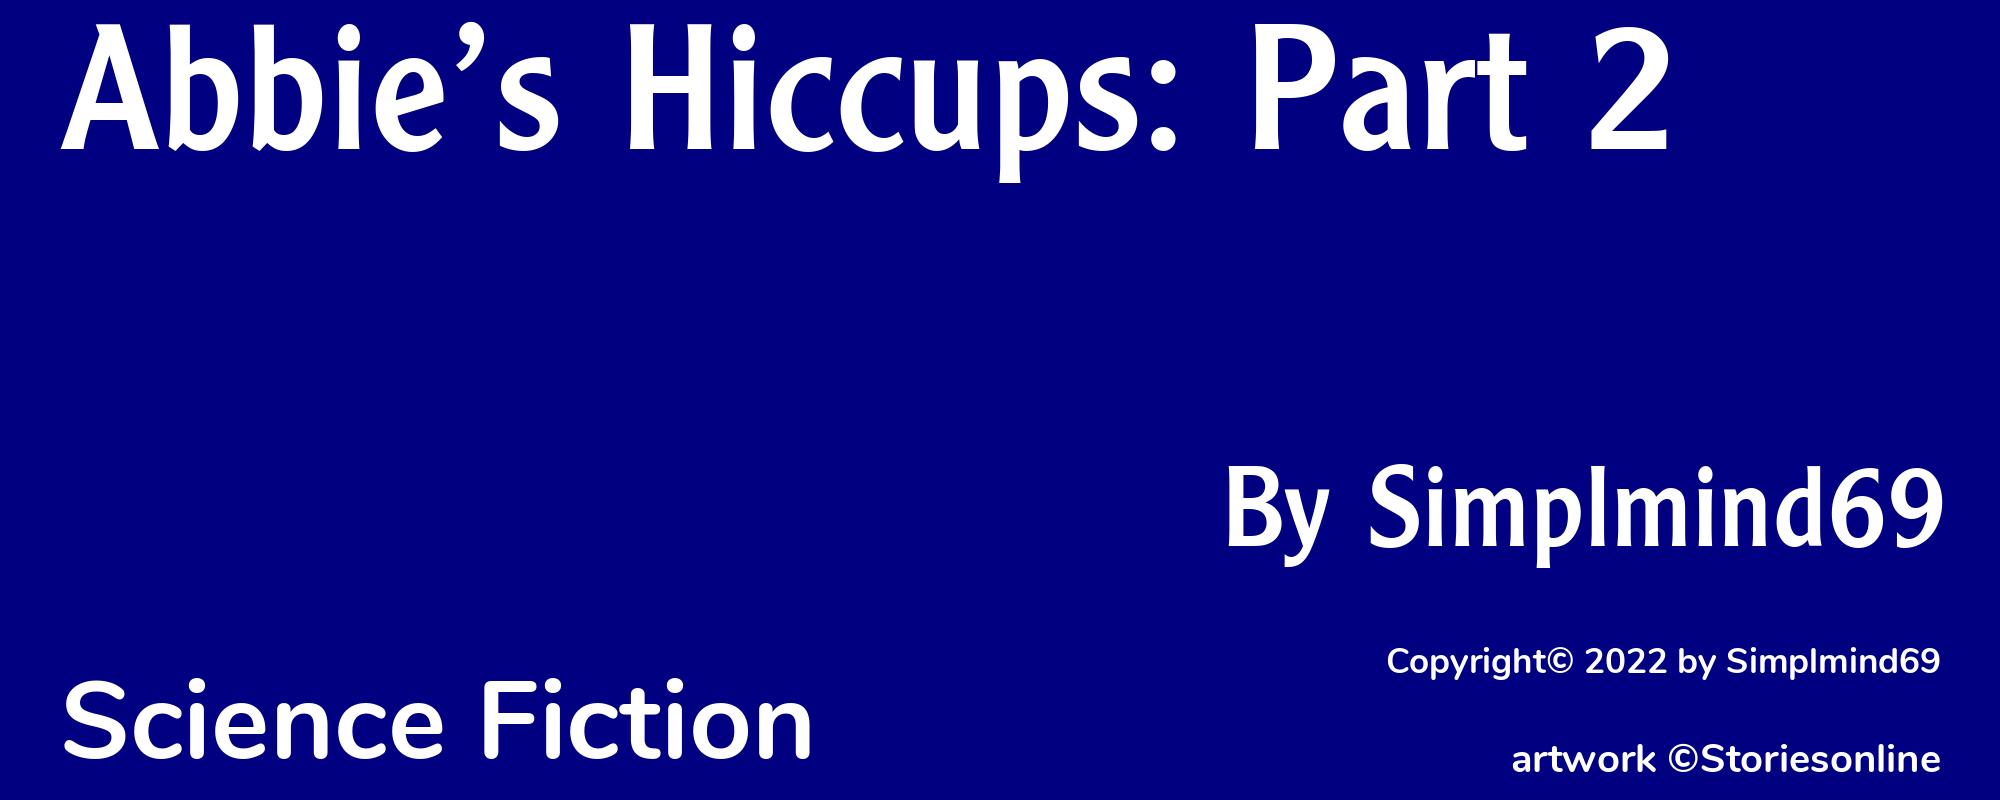 Abbie’s Hiccups: Part 2 - Cover